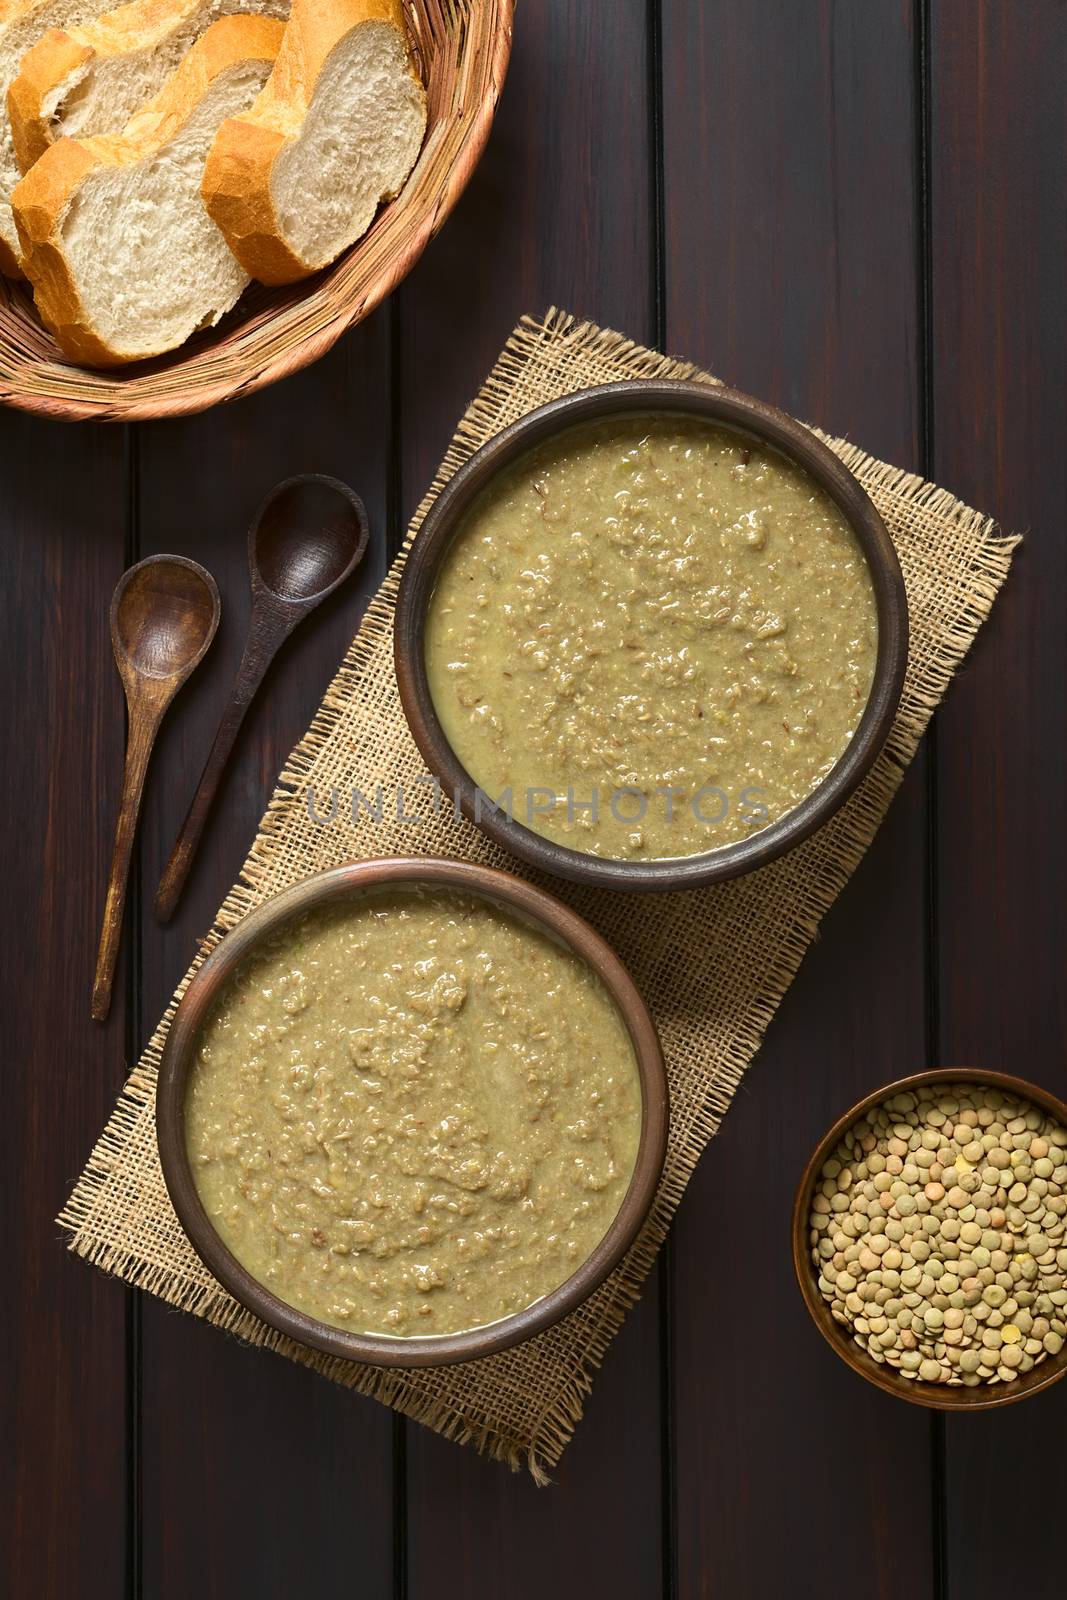 Cream of lentil soup in rustic bowls with wooden spoons, bread slices in basket and raw lentils in small bowl on the side, photographed overhead on dark wood with natural light